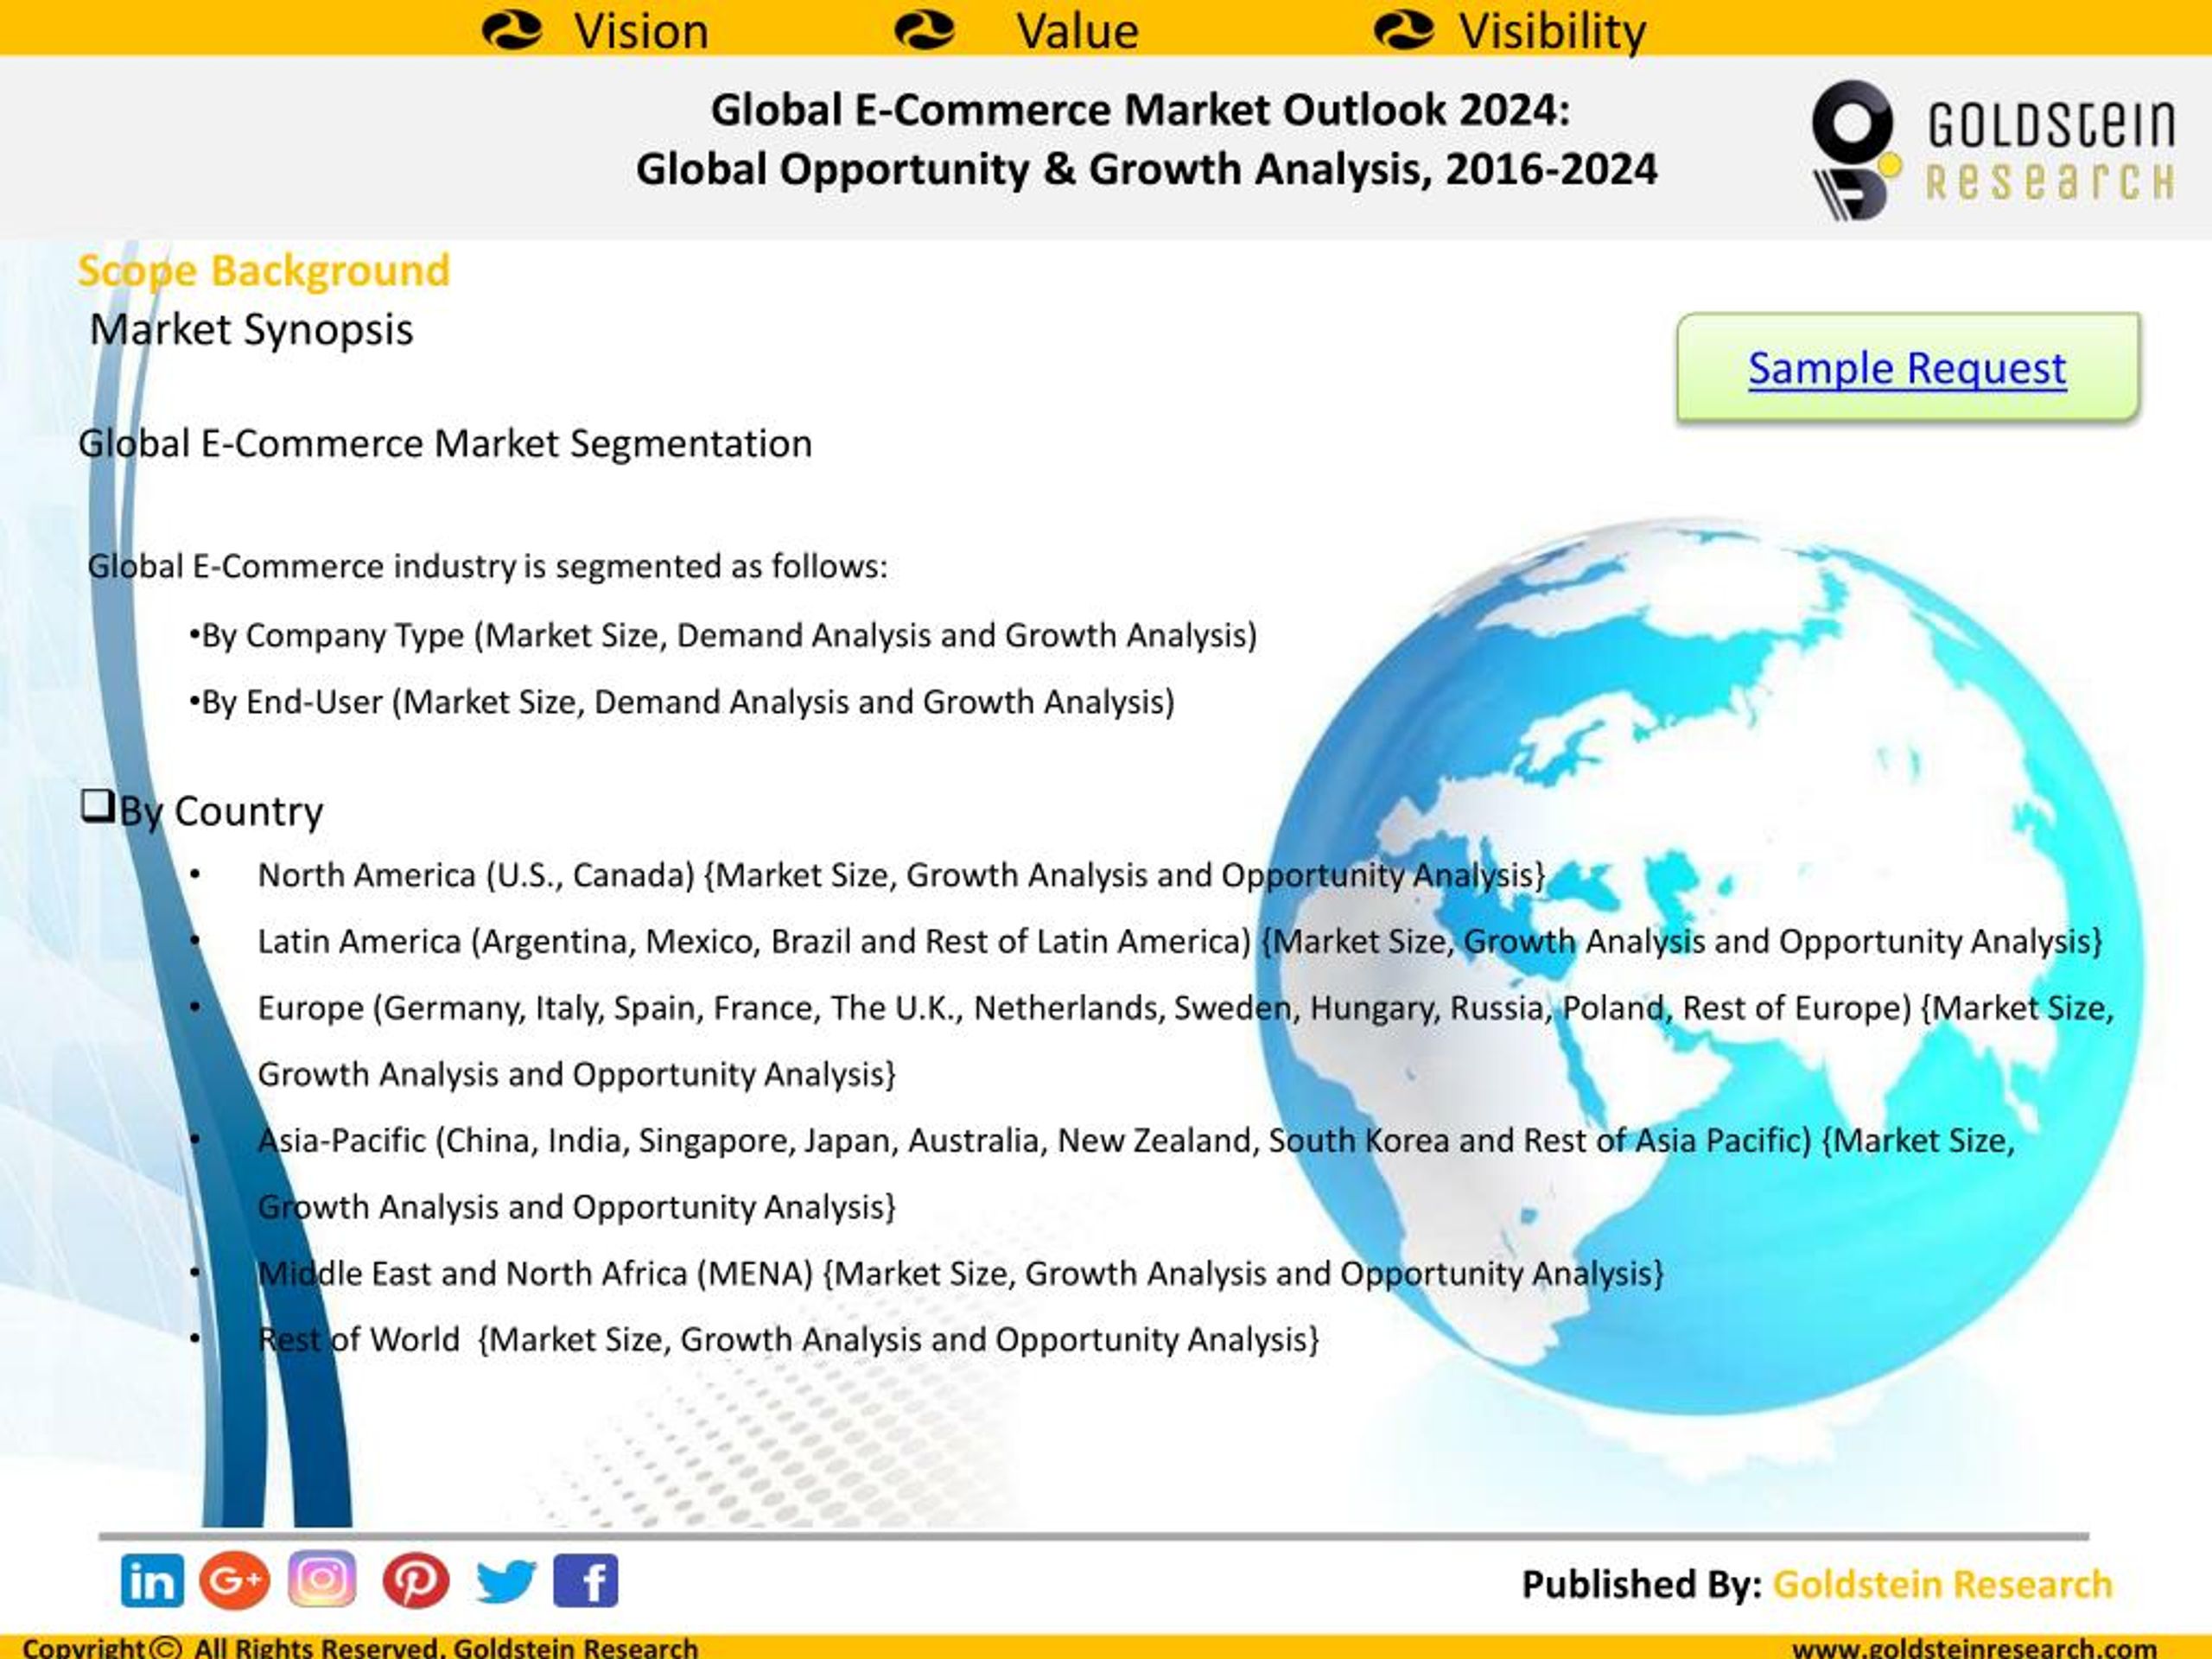 PPT Market Outlook 2024 Global Opportunities Assessment And Demand Analysis